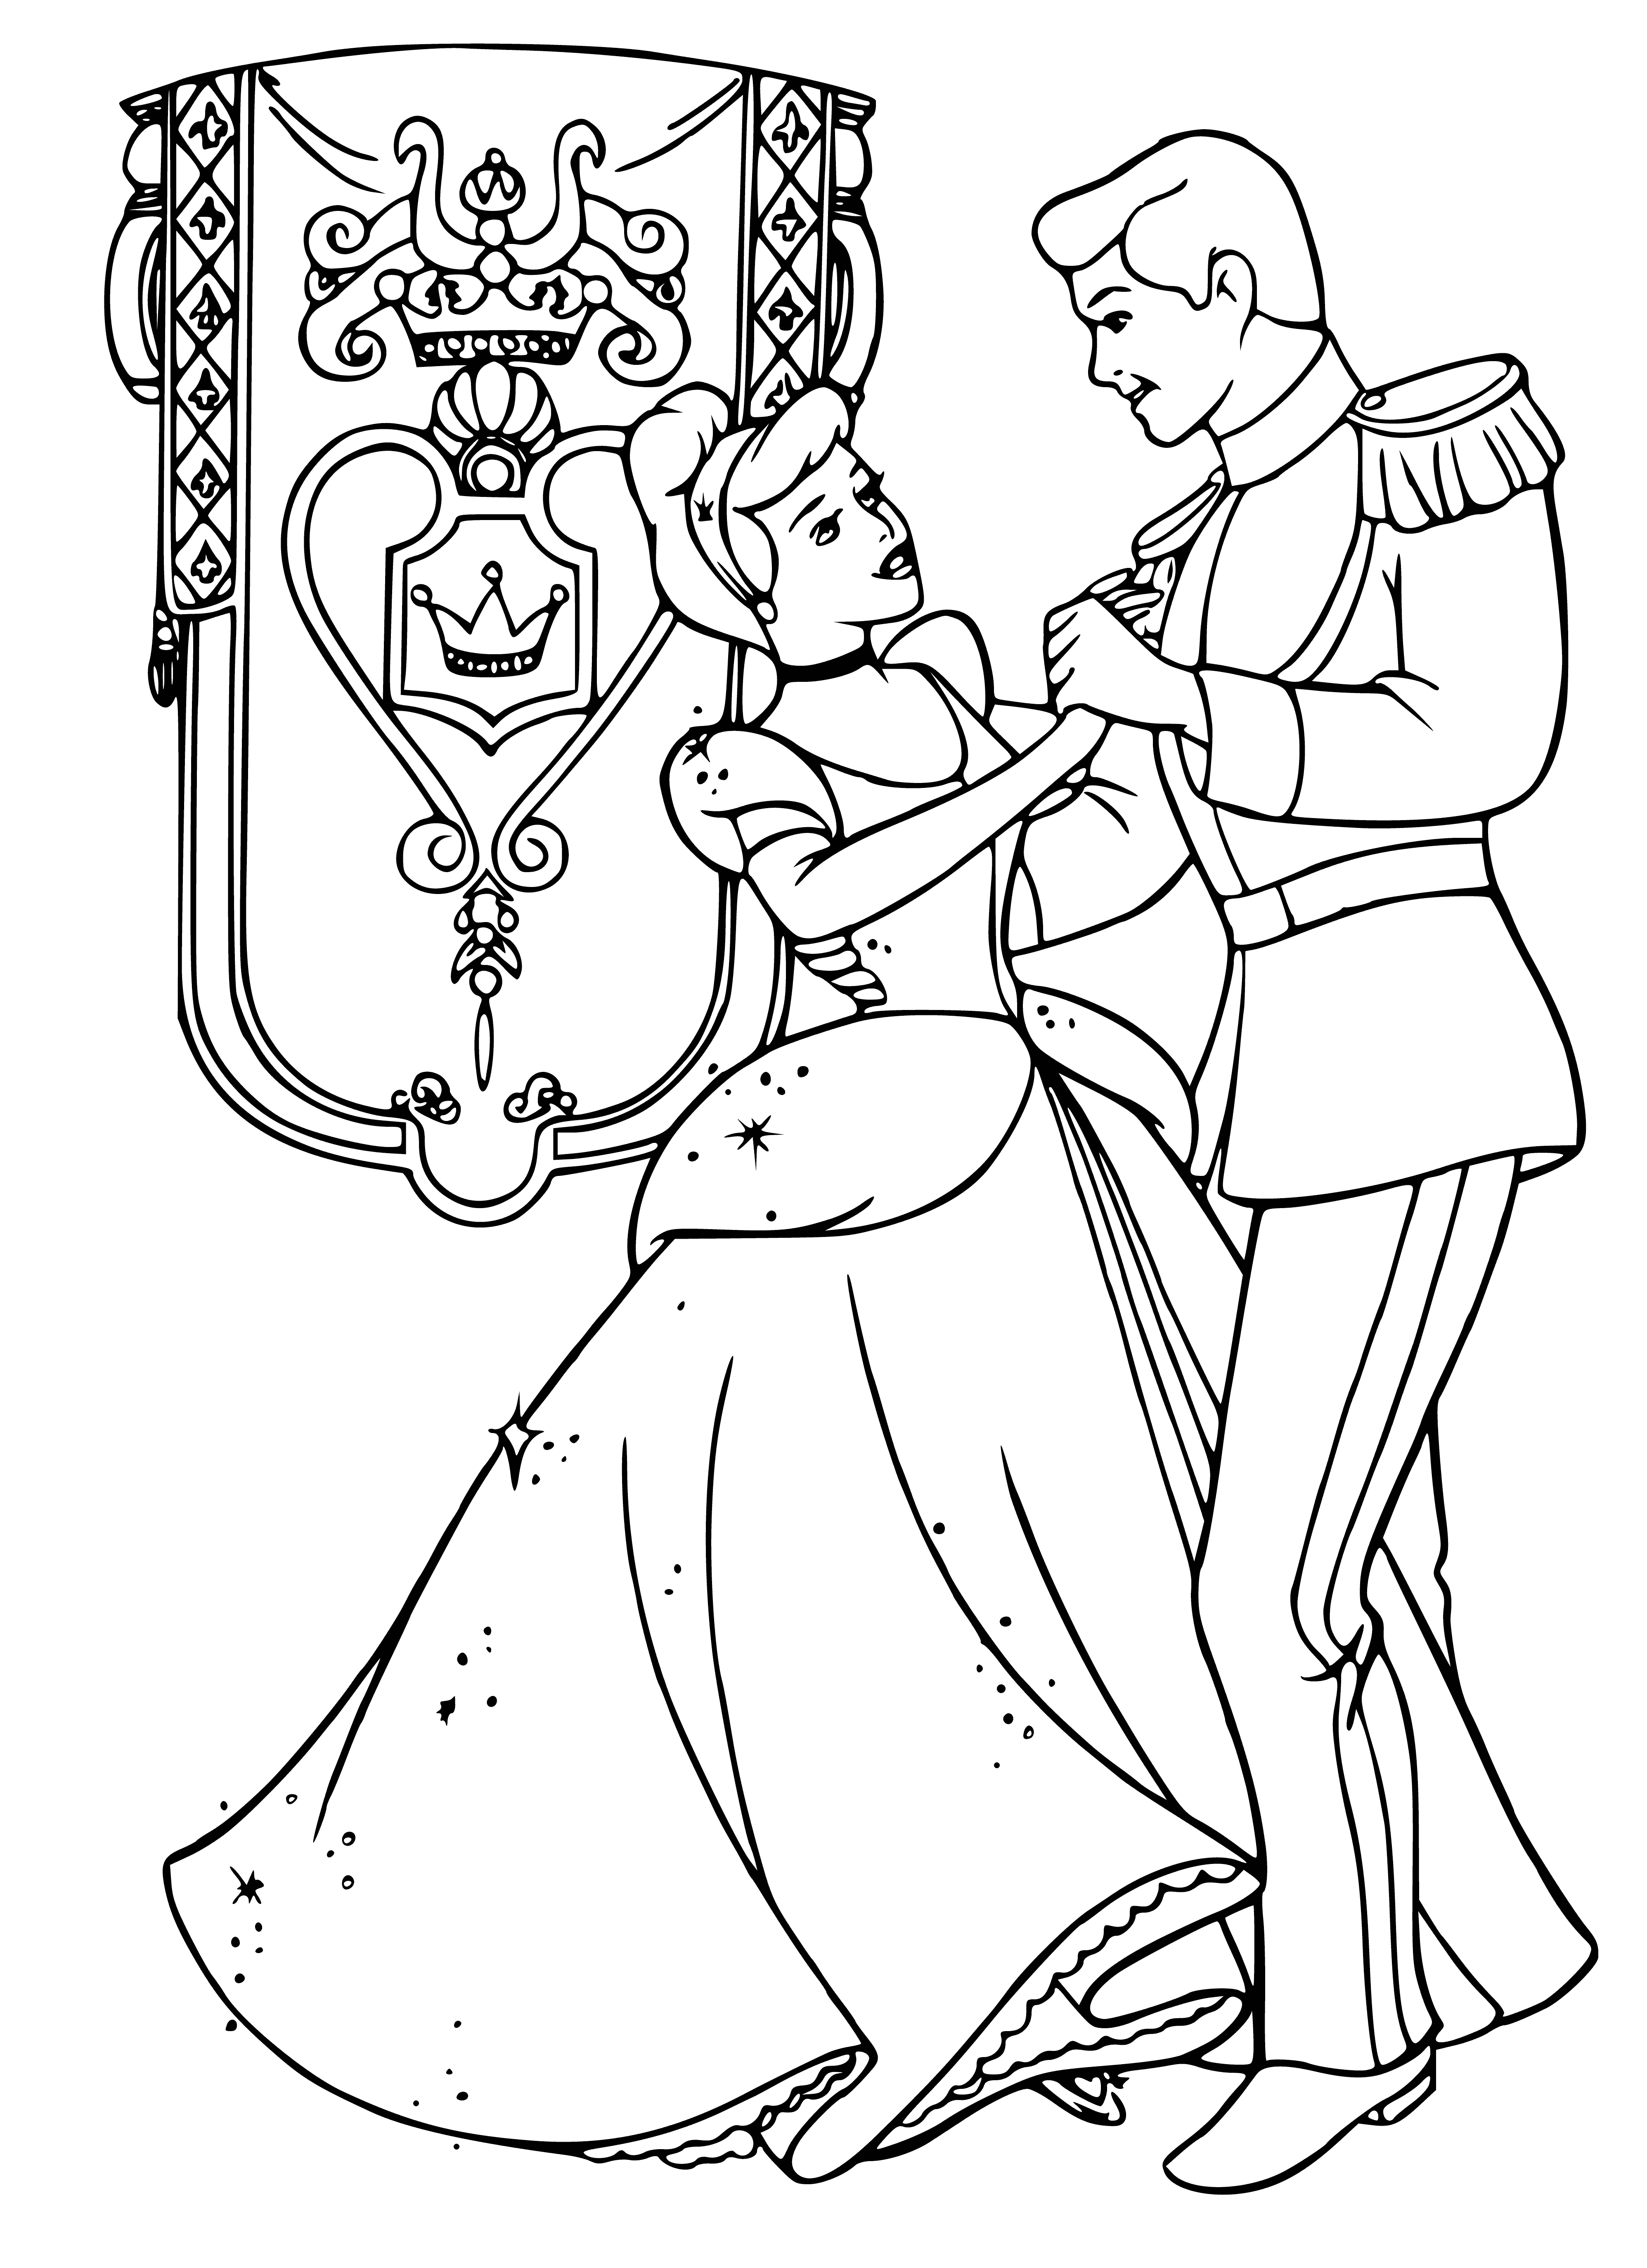 Cinderella dancing with the prince coloring page